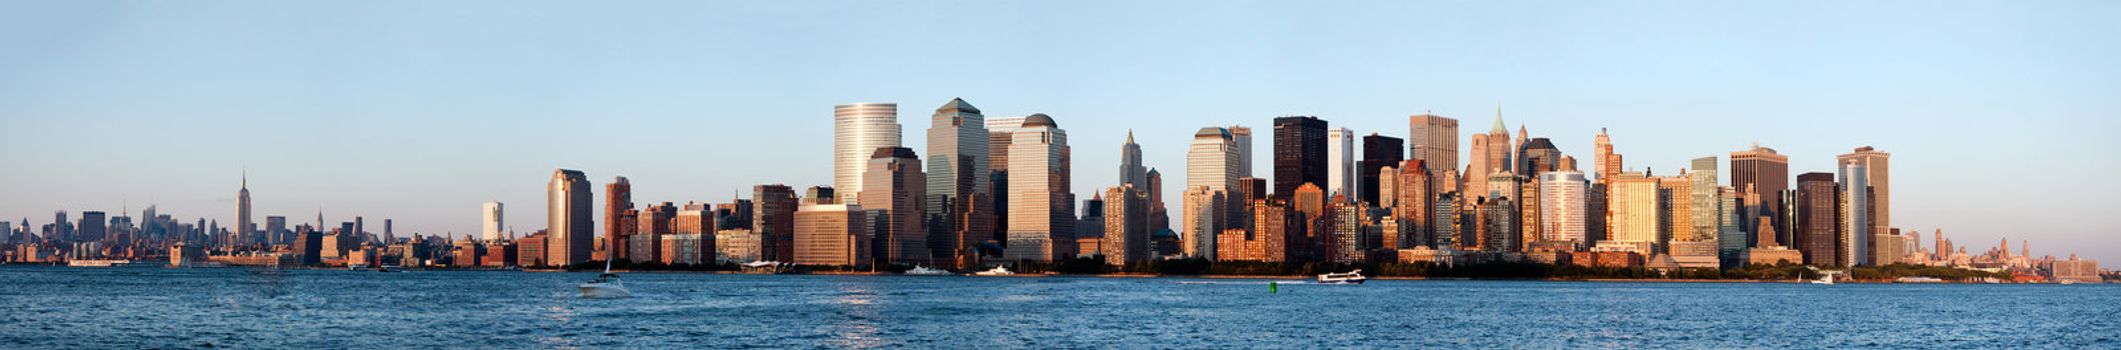 Panorama of New York City Manhattan skyline showing downtown financial district with world trade center WTC and midtown with Empire State building.